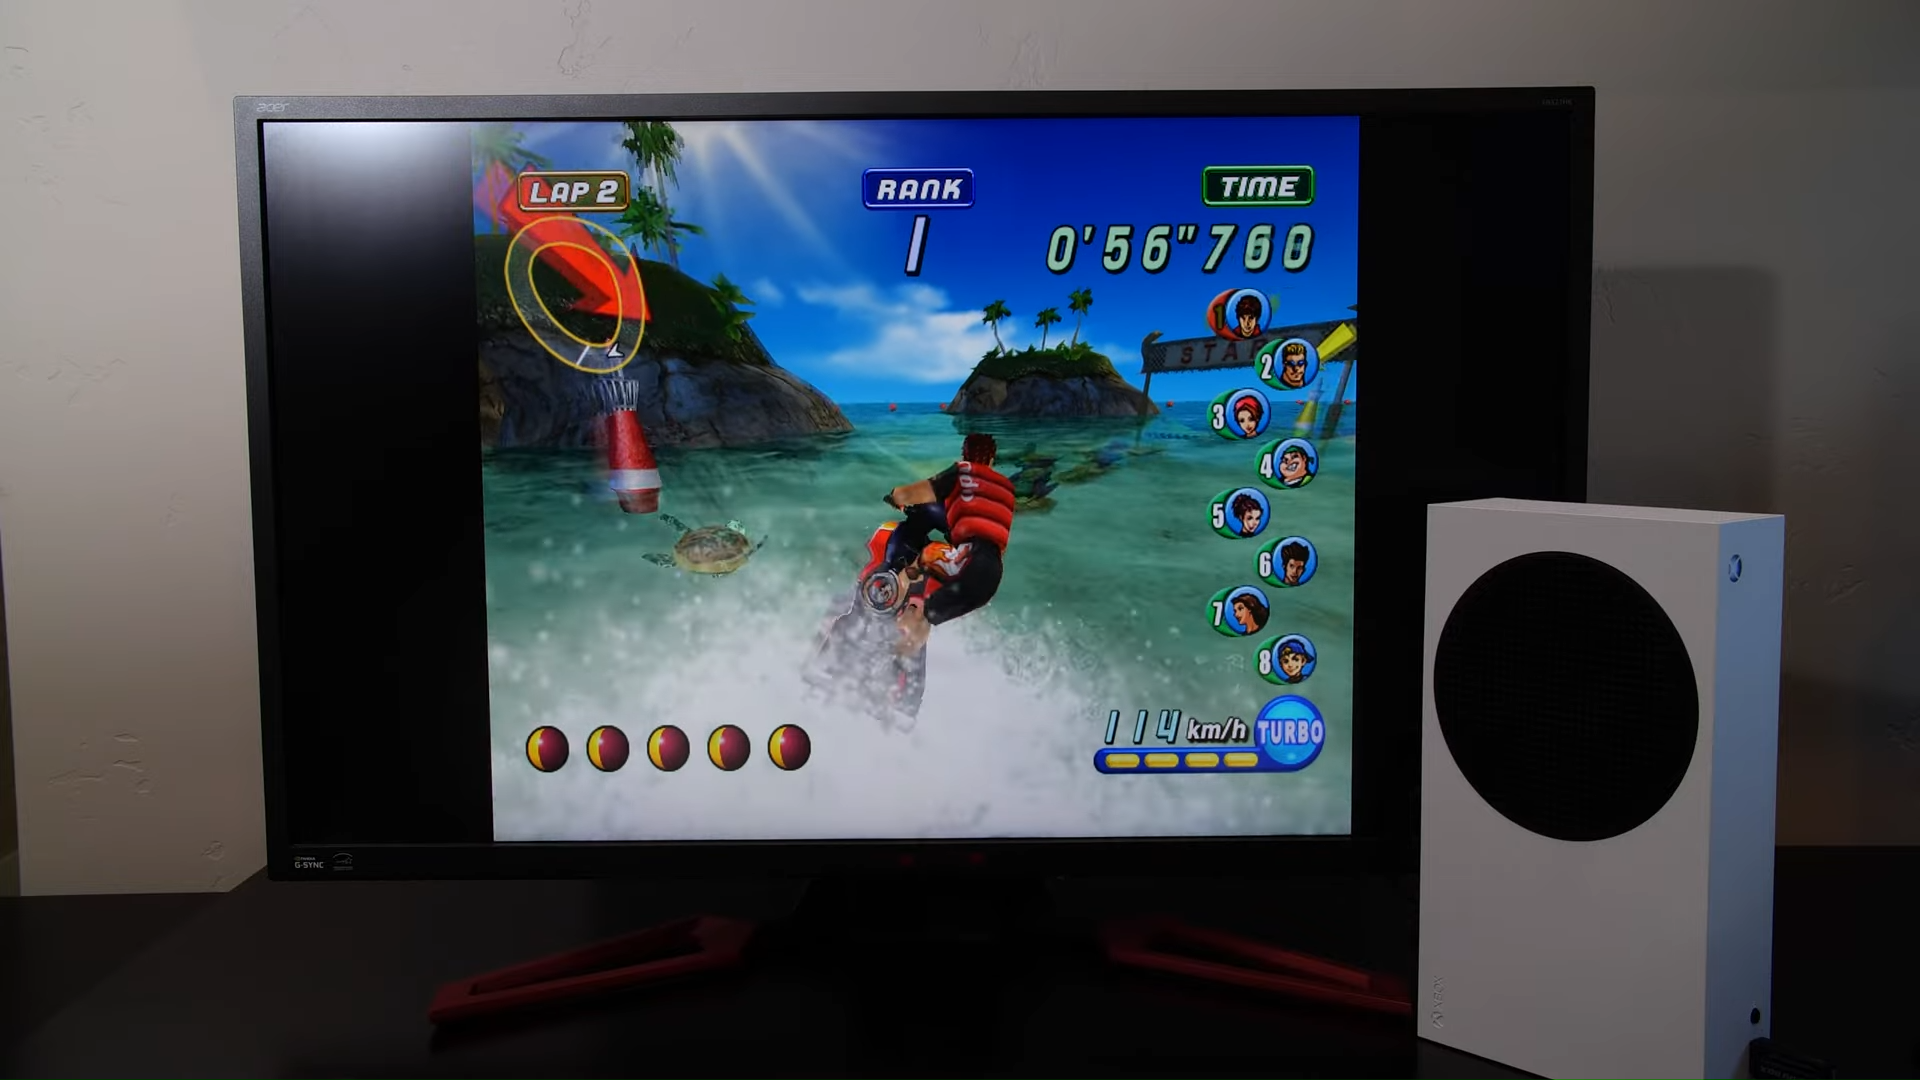 Wii U emulator can now upgrade game graphics to 4K